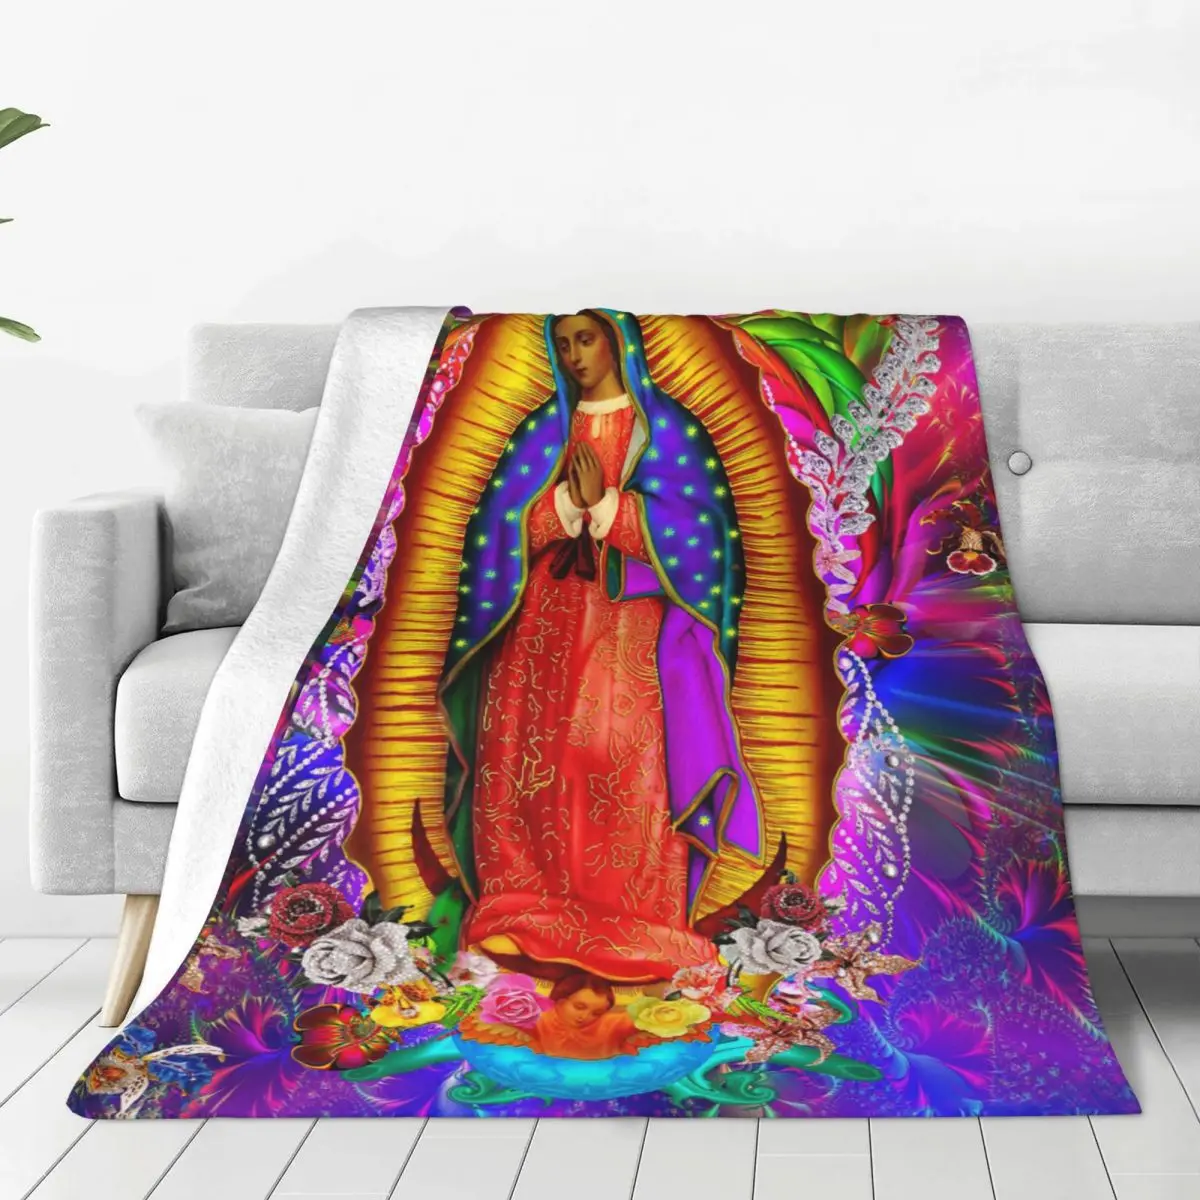 

Virgin Mary Jesus Christian Knitted Blanket Fleece Our Lady of Guadalupe Mexican Throw Blankets for Home Couch Bedroom Quilt